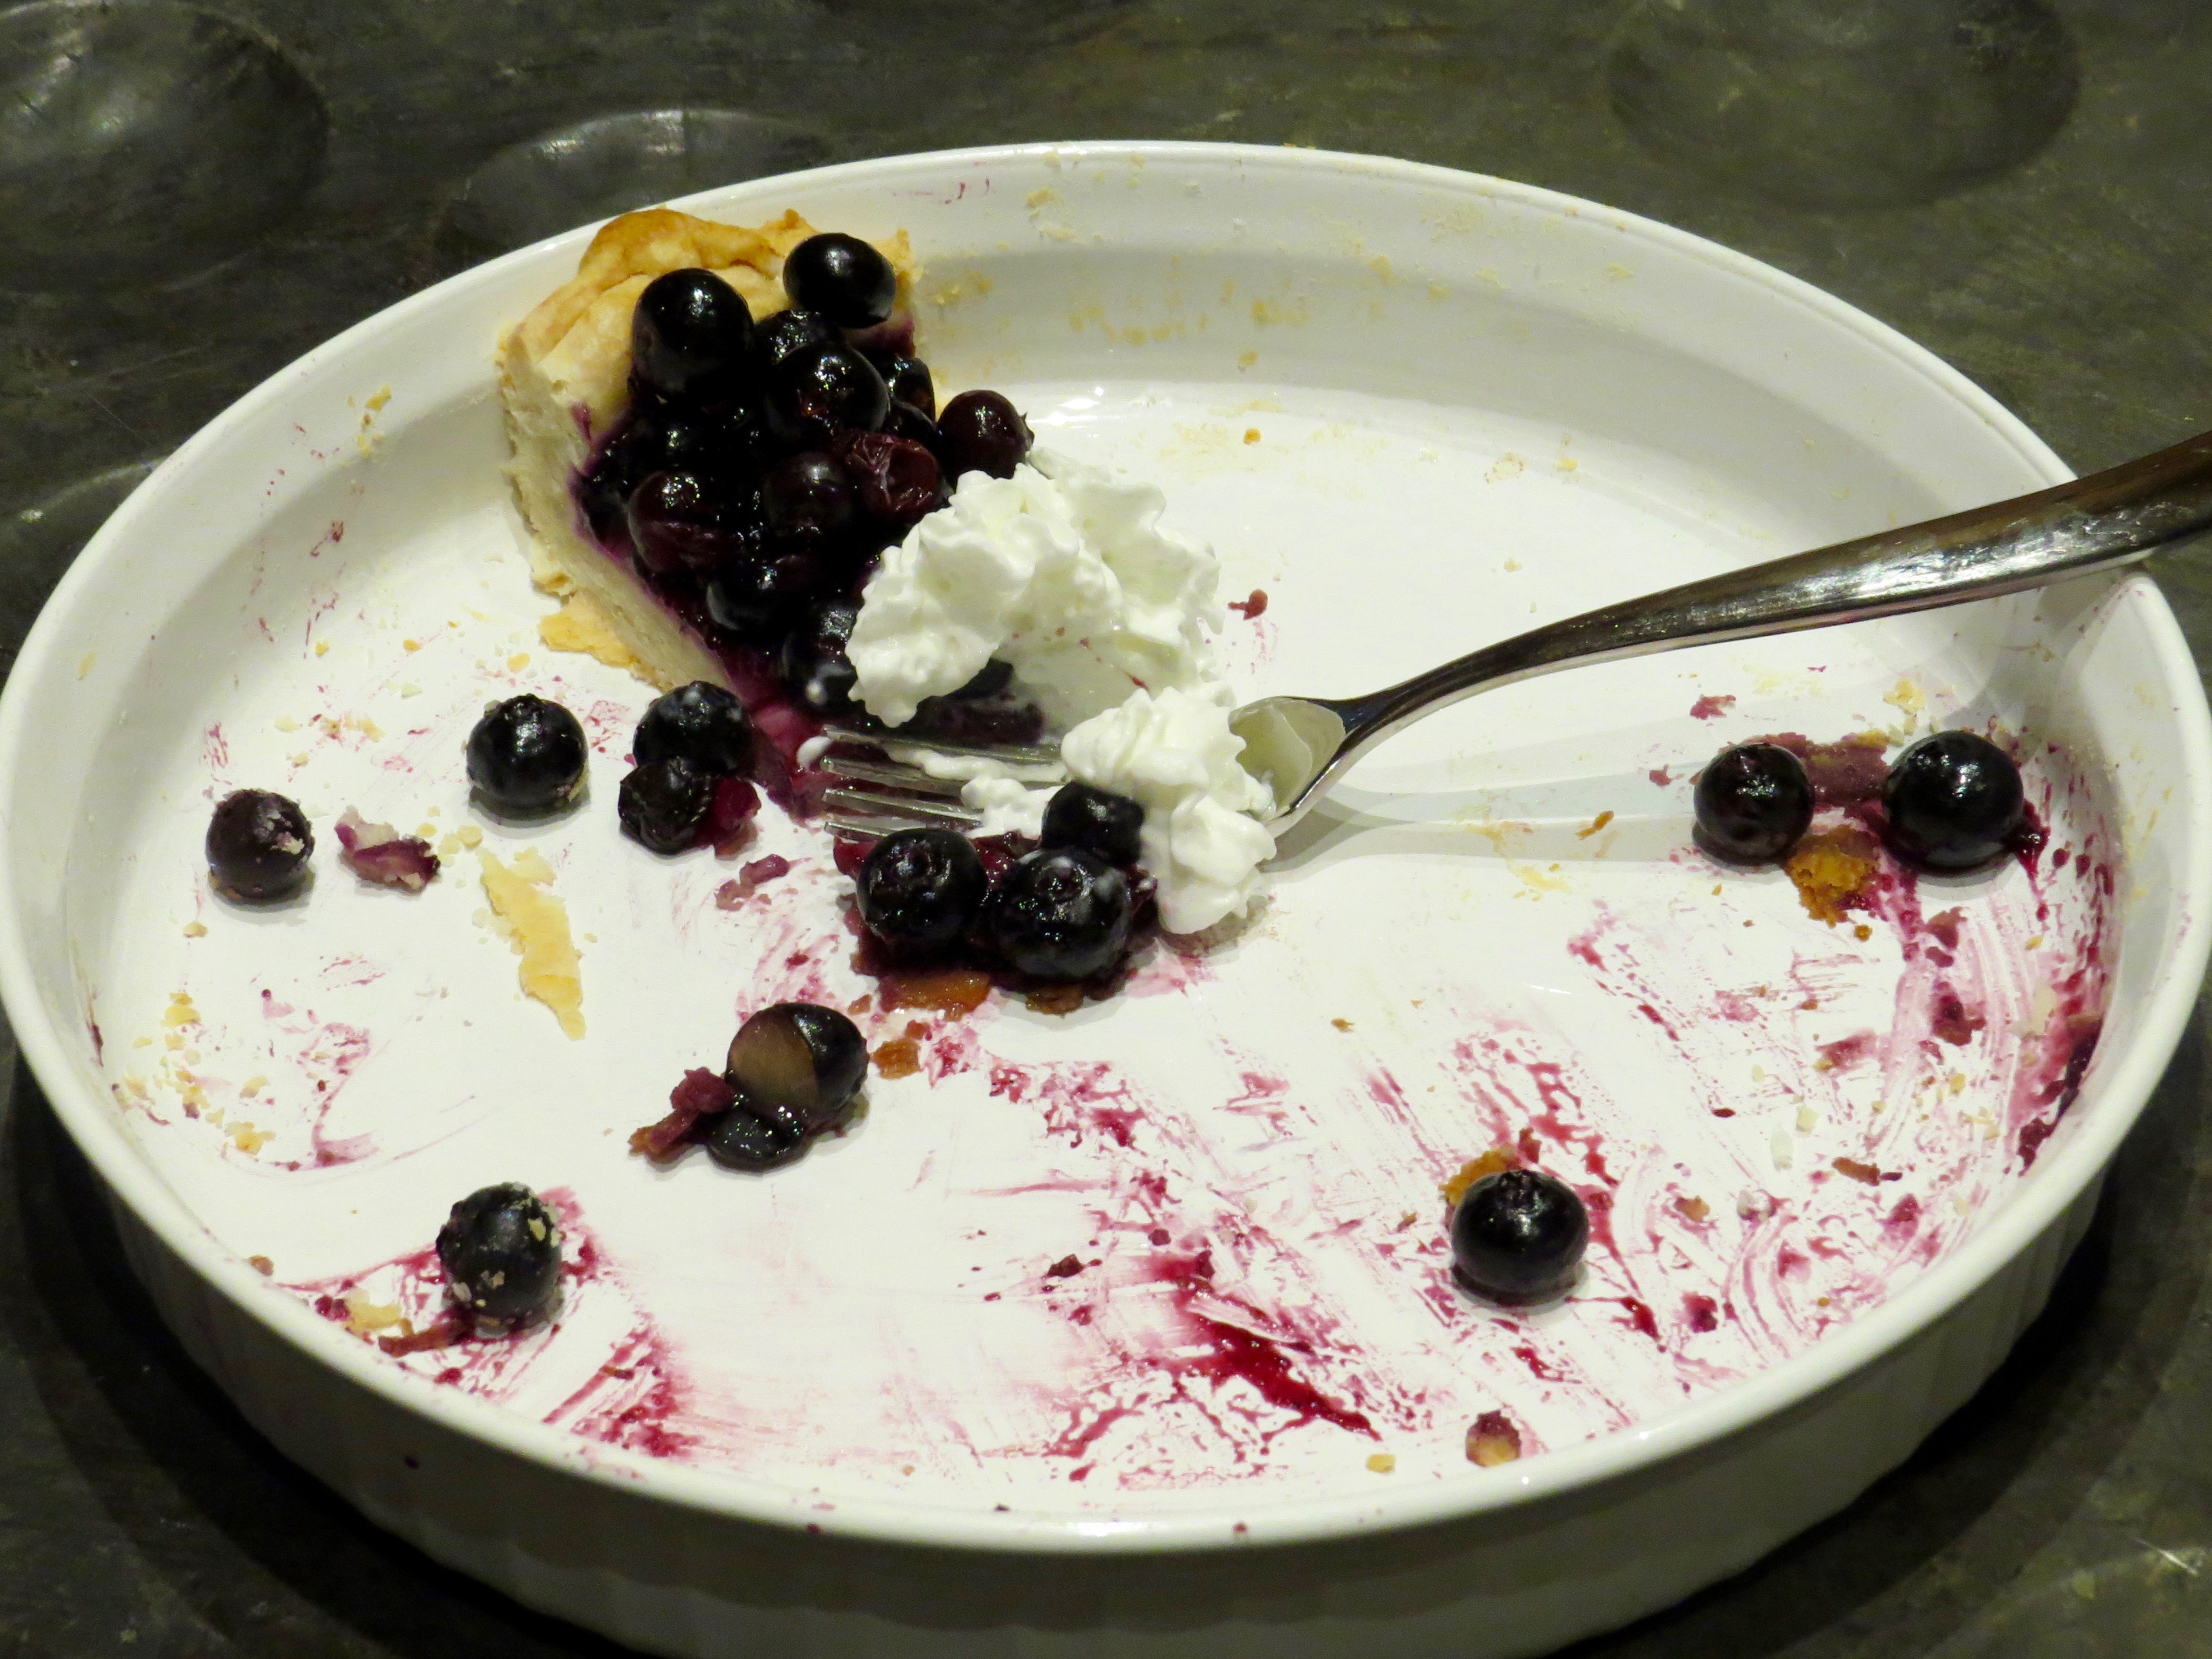 THE MORNING AFTER, FOR BREAKFAST  I ADDED SOME LEFTOVER WHIPPED CREAM AND FINISHED THE PIE. HERE'S PROOF THAT THE JUICE REMAINED IN THE BERRIES AND DIDN'T SEEP OUT ONTO THE TART DISH. 